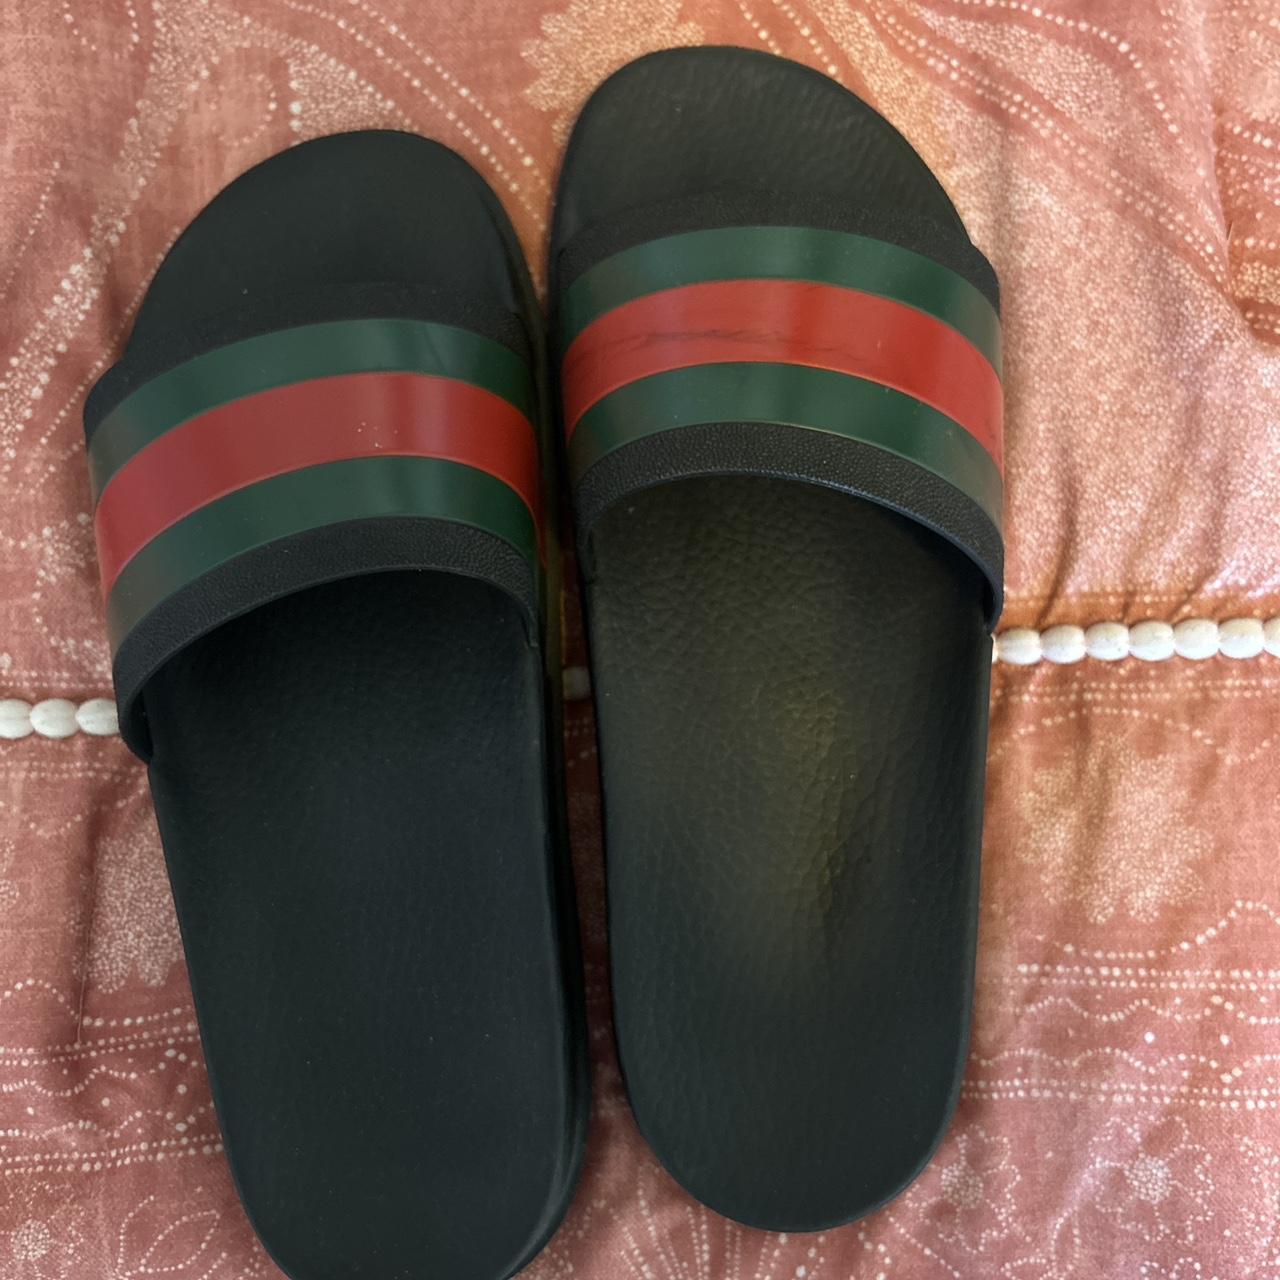 GUCCI slides with tiger graphic 2017 collection - Depop